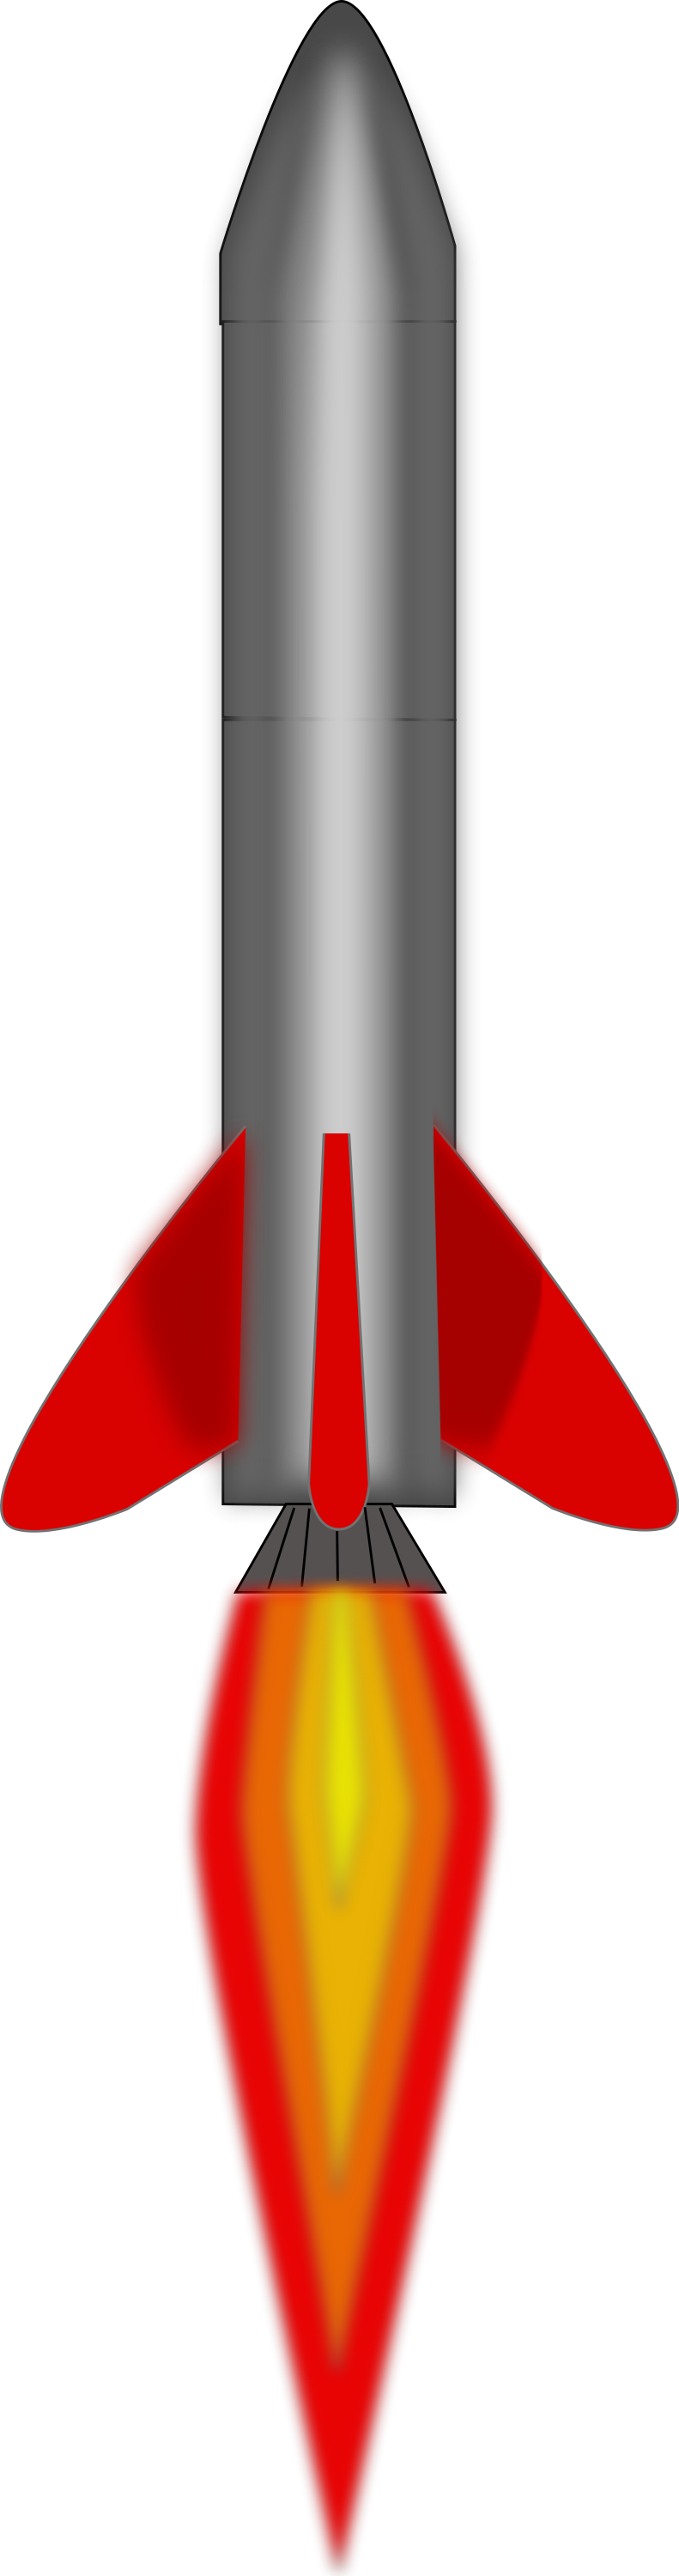 Transportations Clipart Rocket Launch Clipart Gallery ~ Free ...